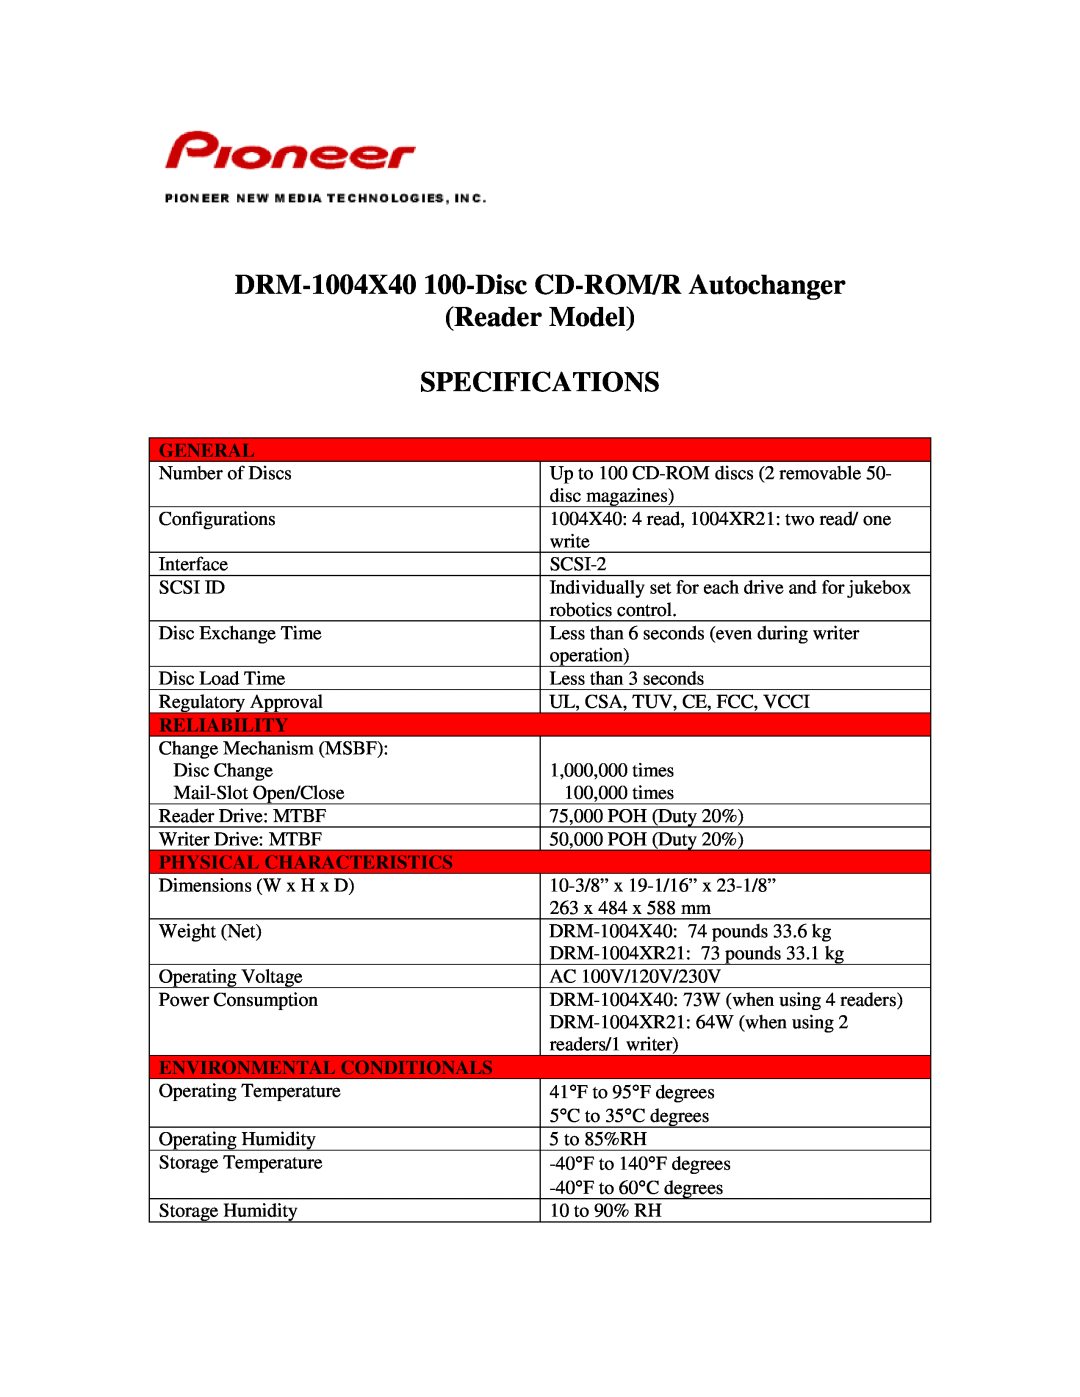 Pioneer specifications DRM-1004X40 100-Disc CD-ROM/RAutochanger, Reader Model, Specifications, General, Reliability 